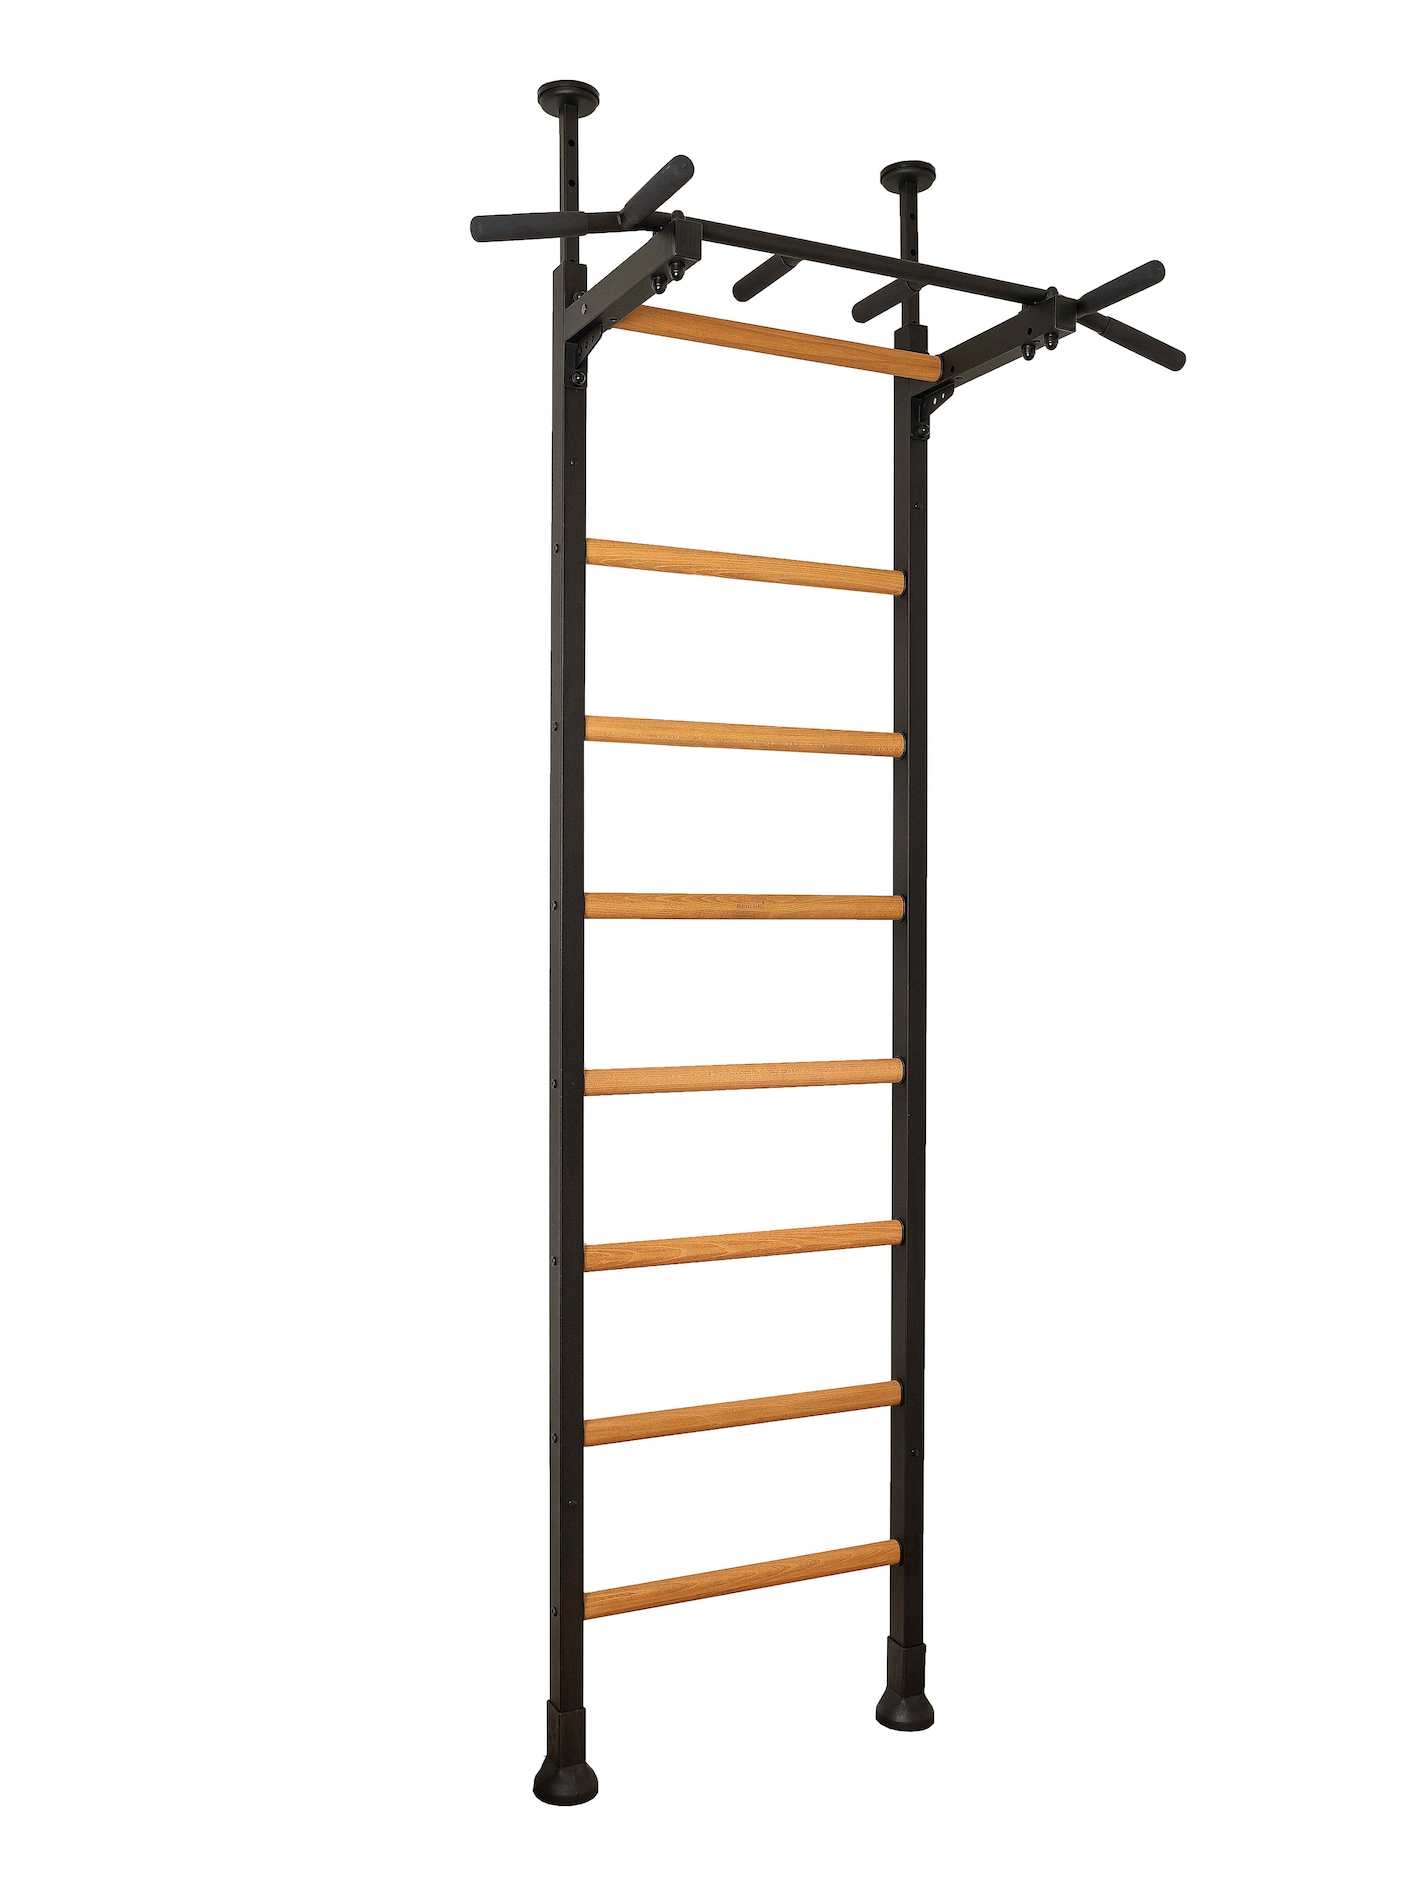 BenchK 521 Wall Bars with Fixed Pull Up Bar